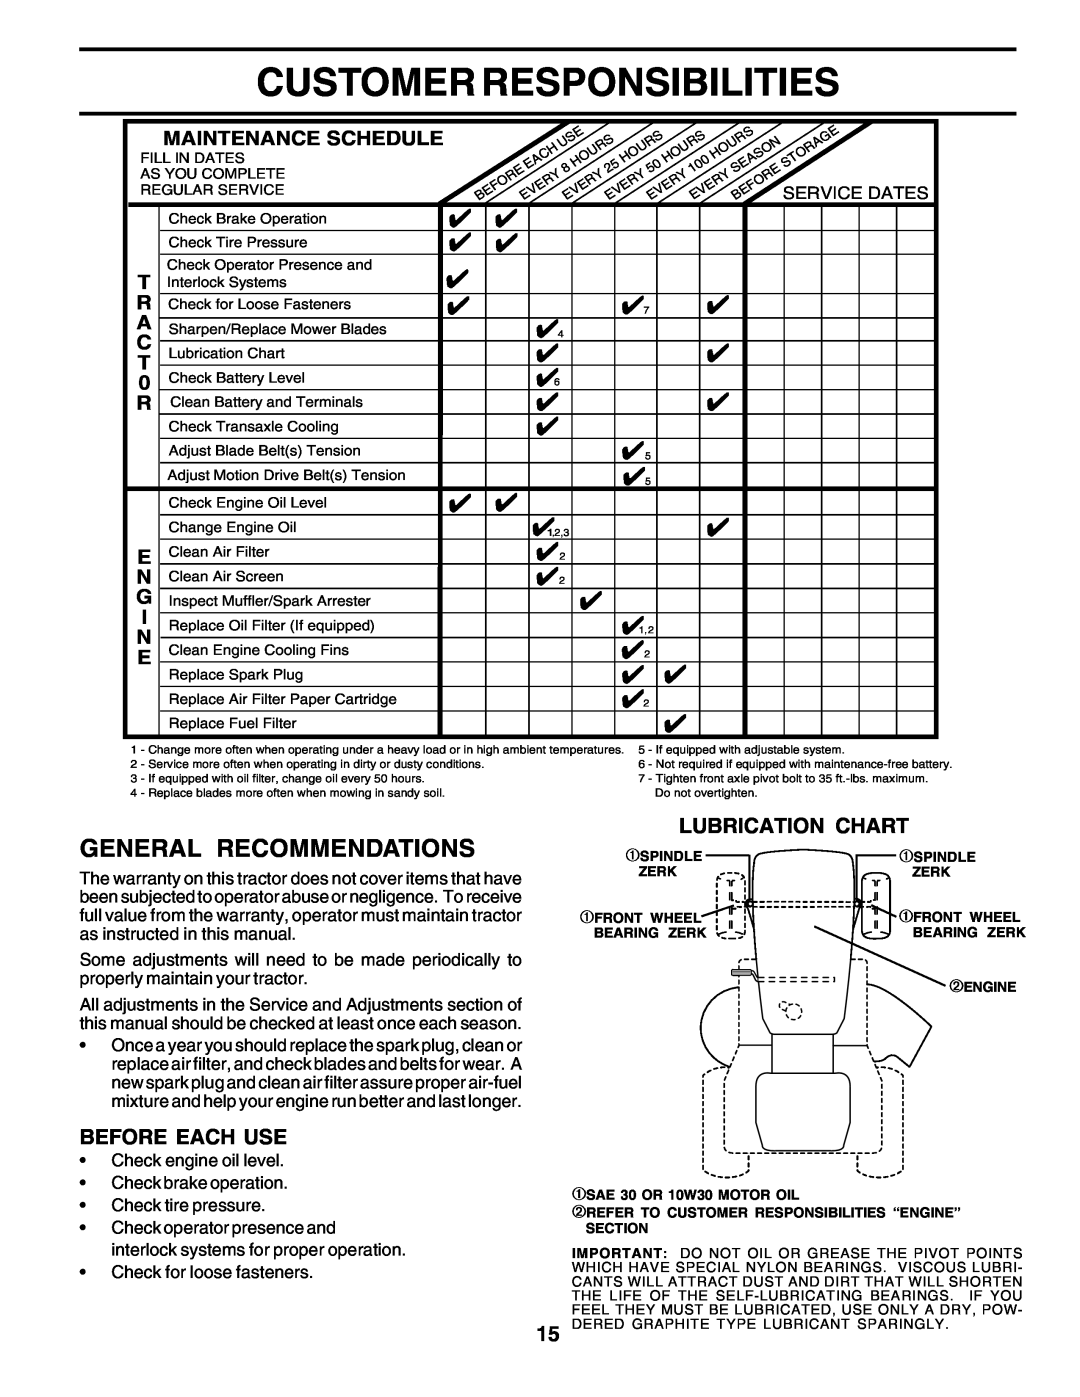 Poulan 178379 owner manual Customer Responsibilities, General Recommendations, Before Each Use, Maintenance Schedule 